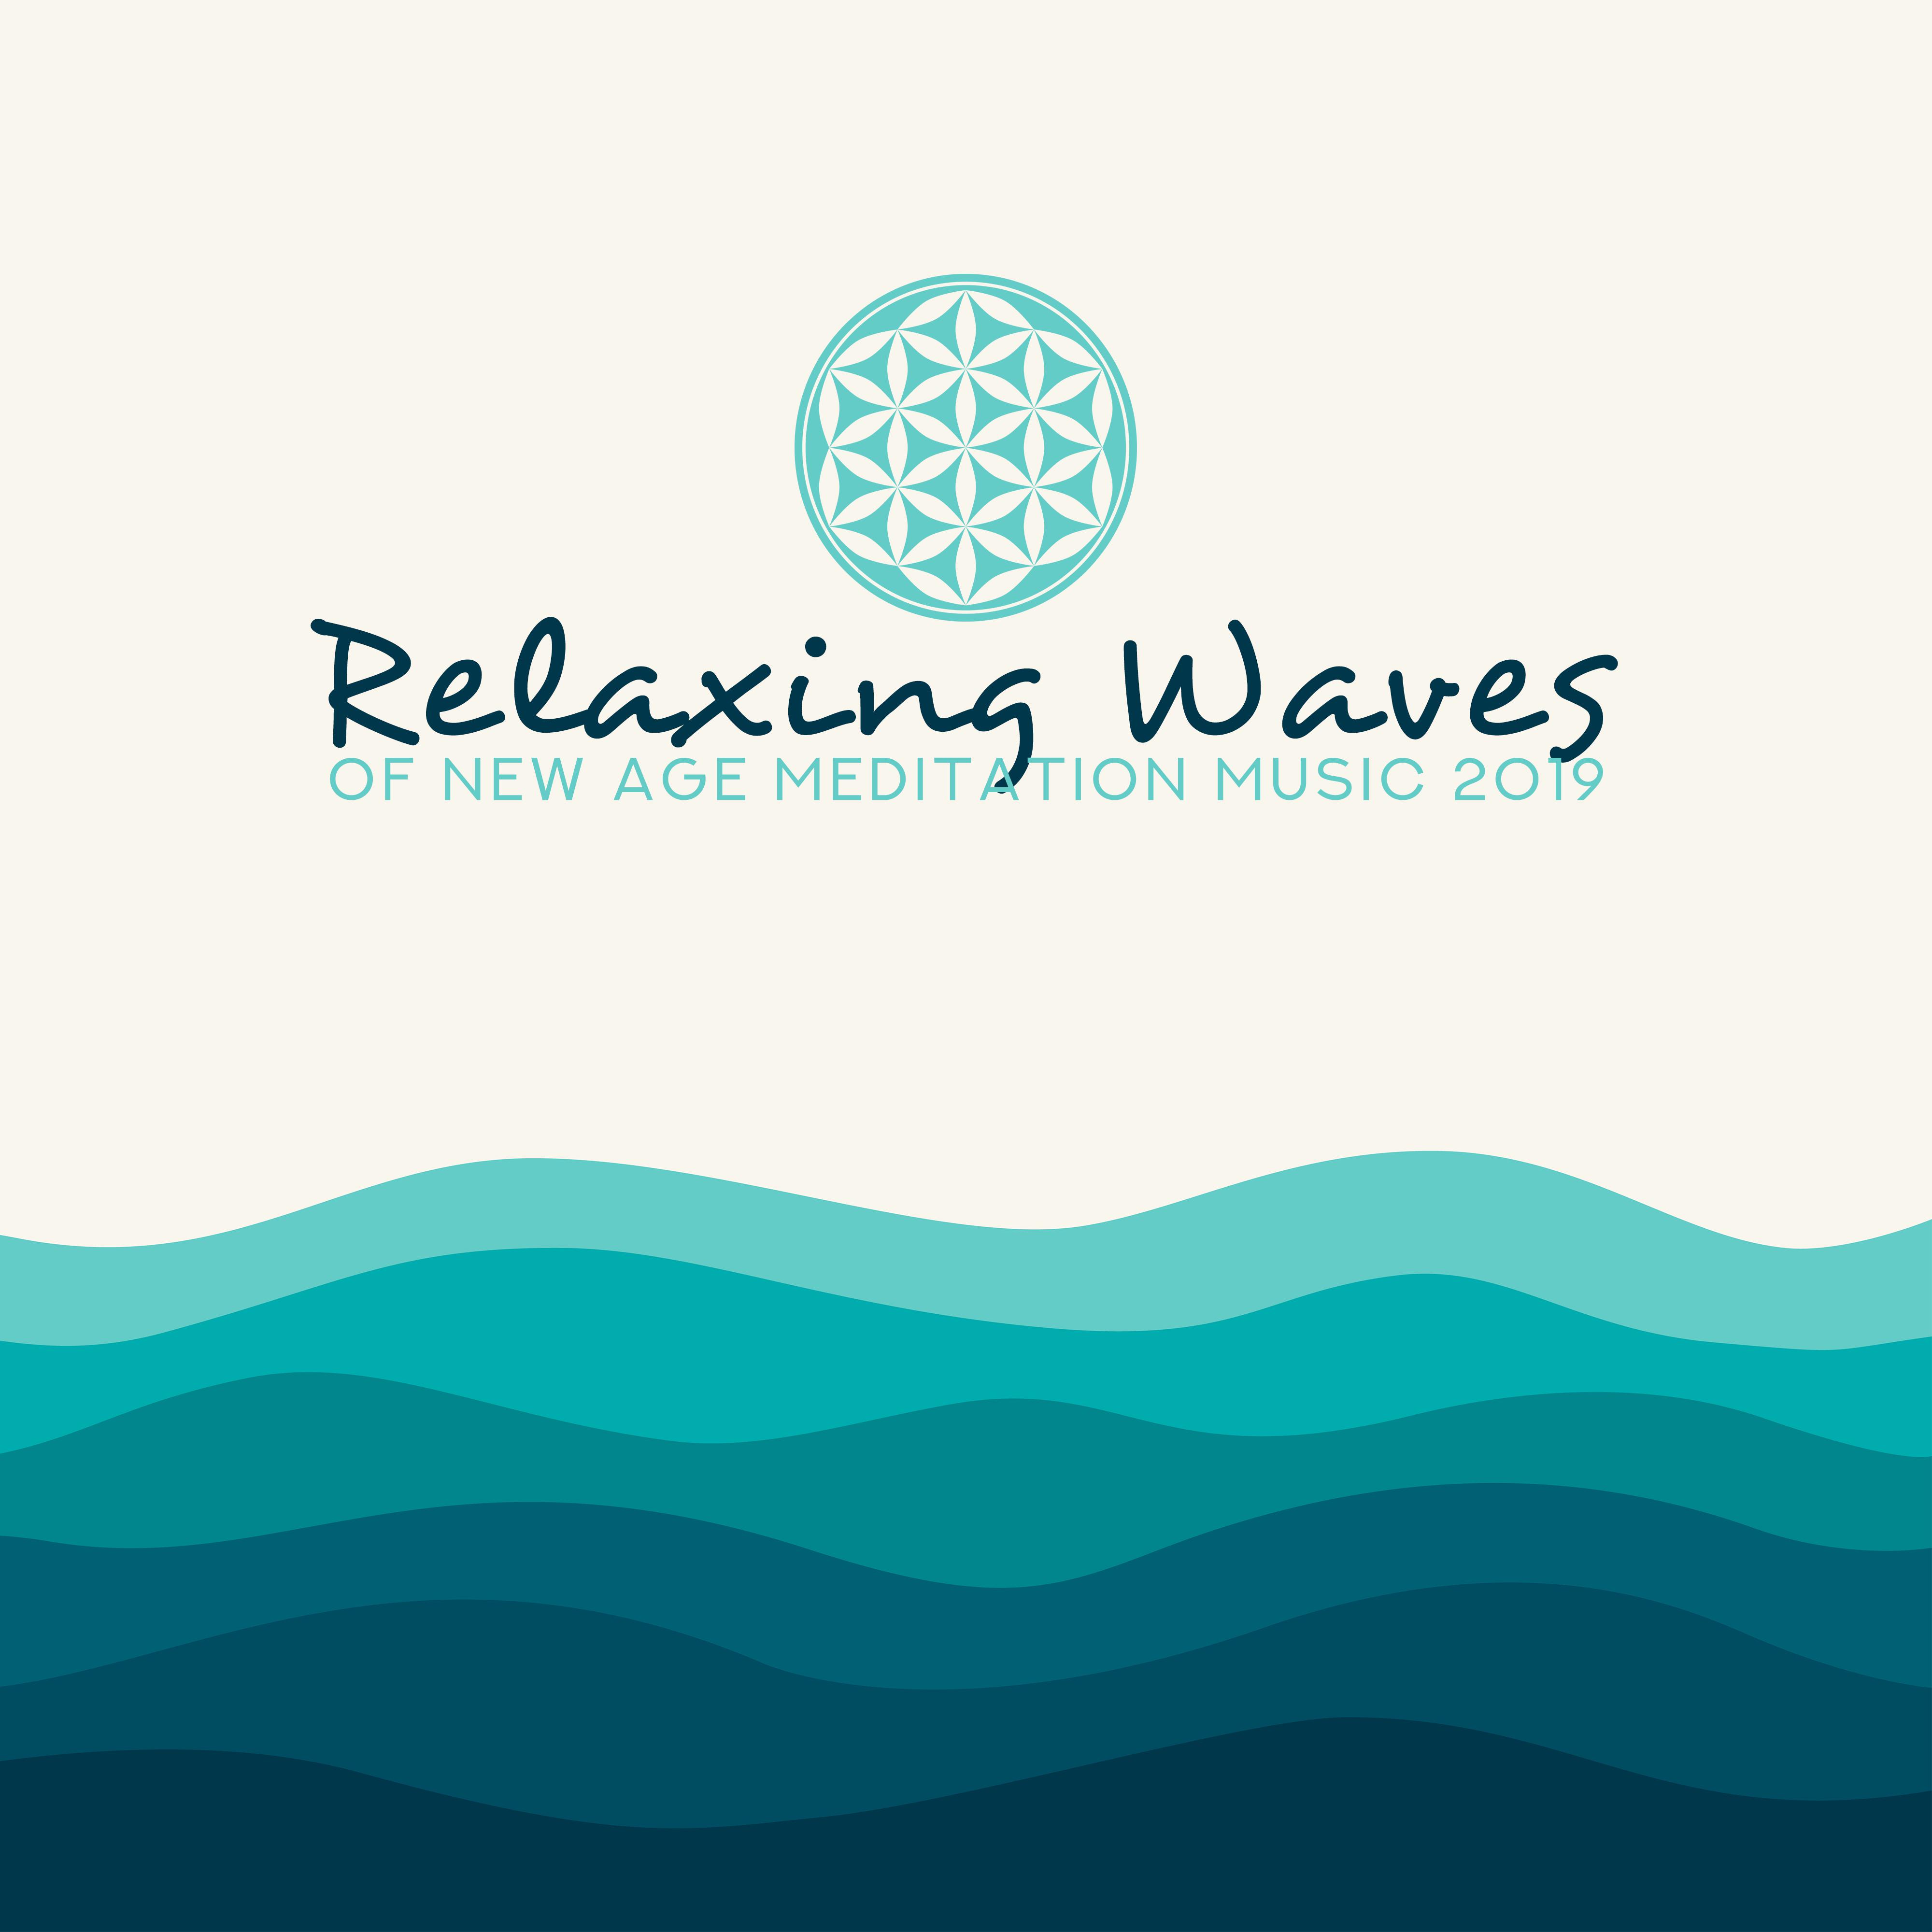 Relaxing Waves of New Age Meditation Music 2019